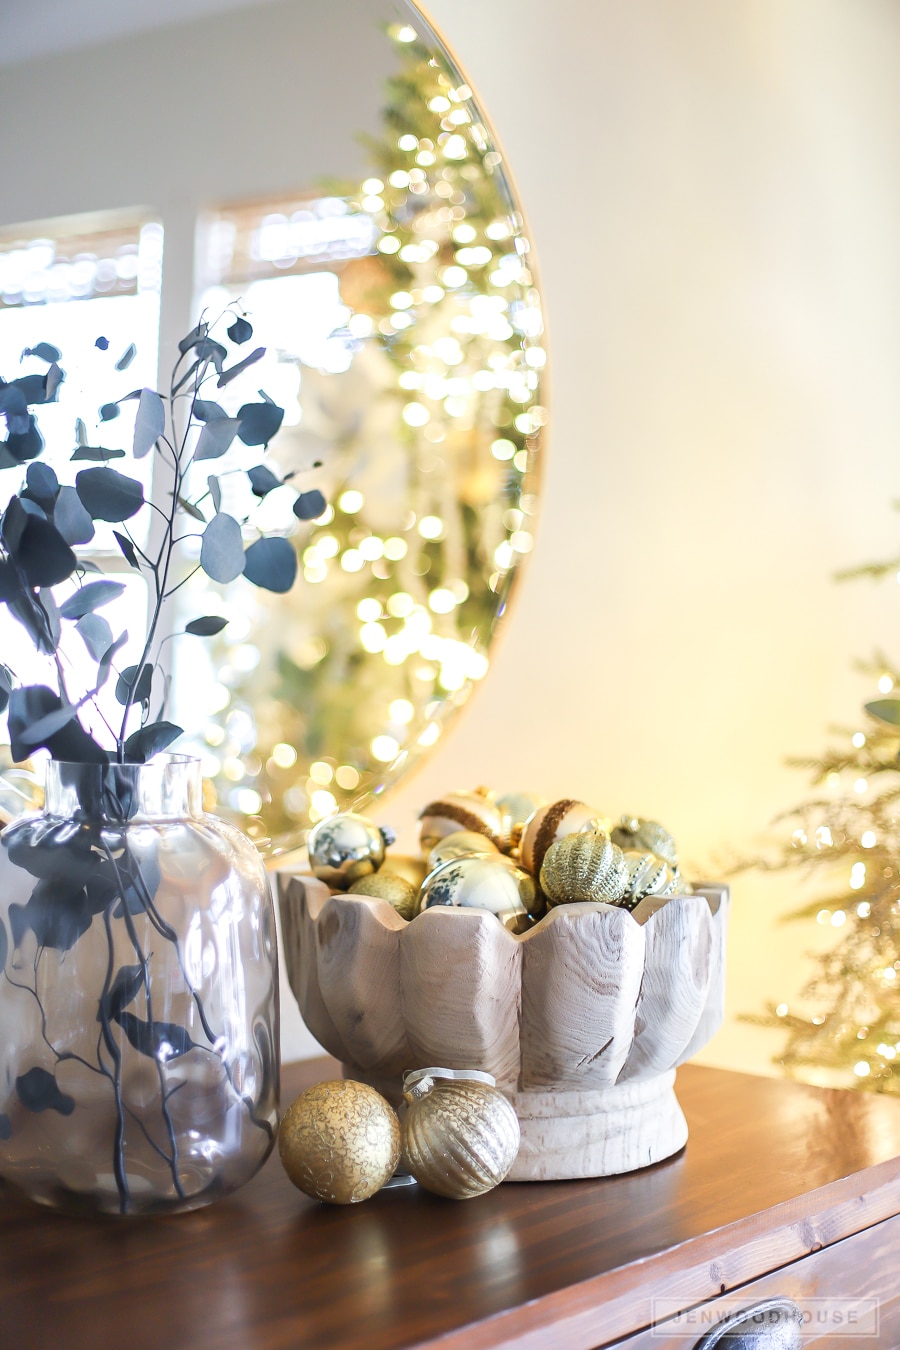 How to decorate for Christmas in the dining room